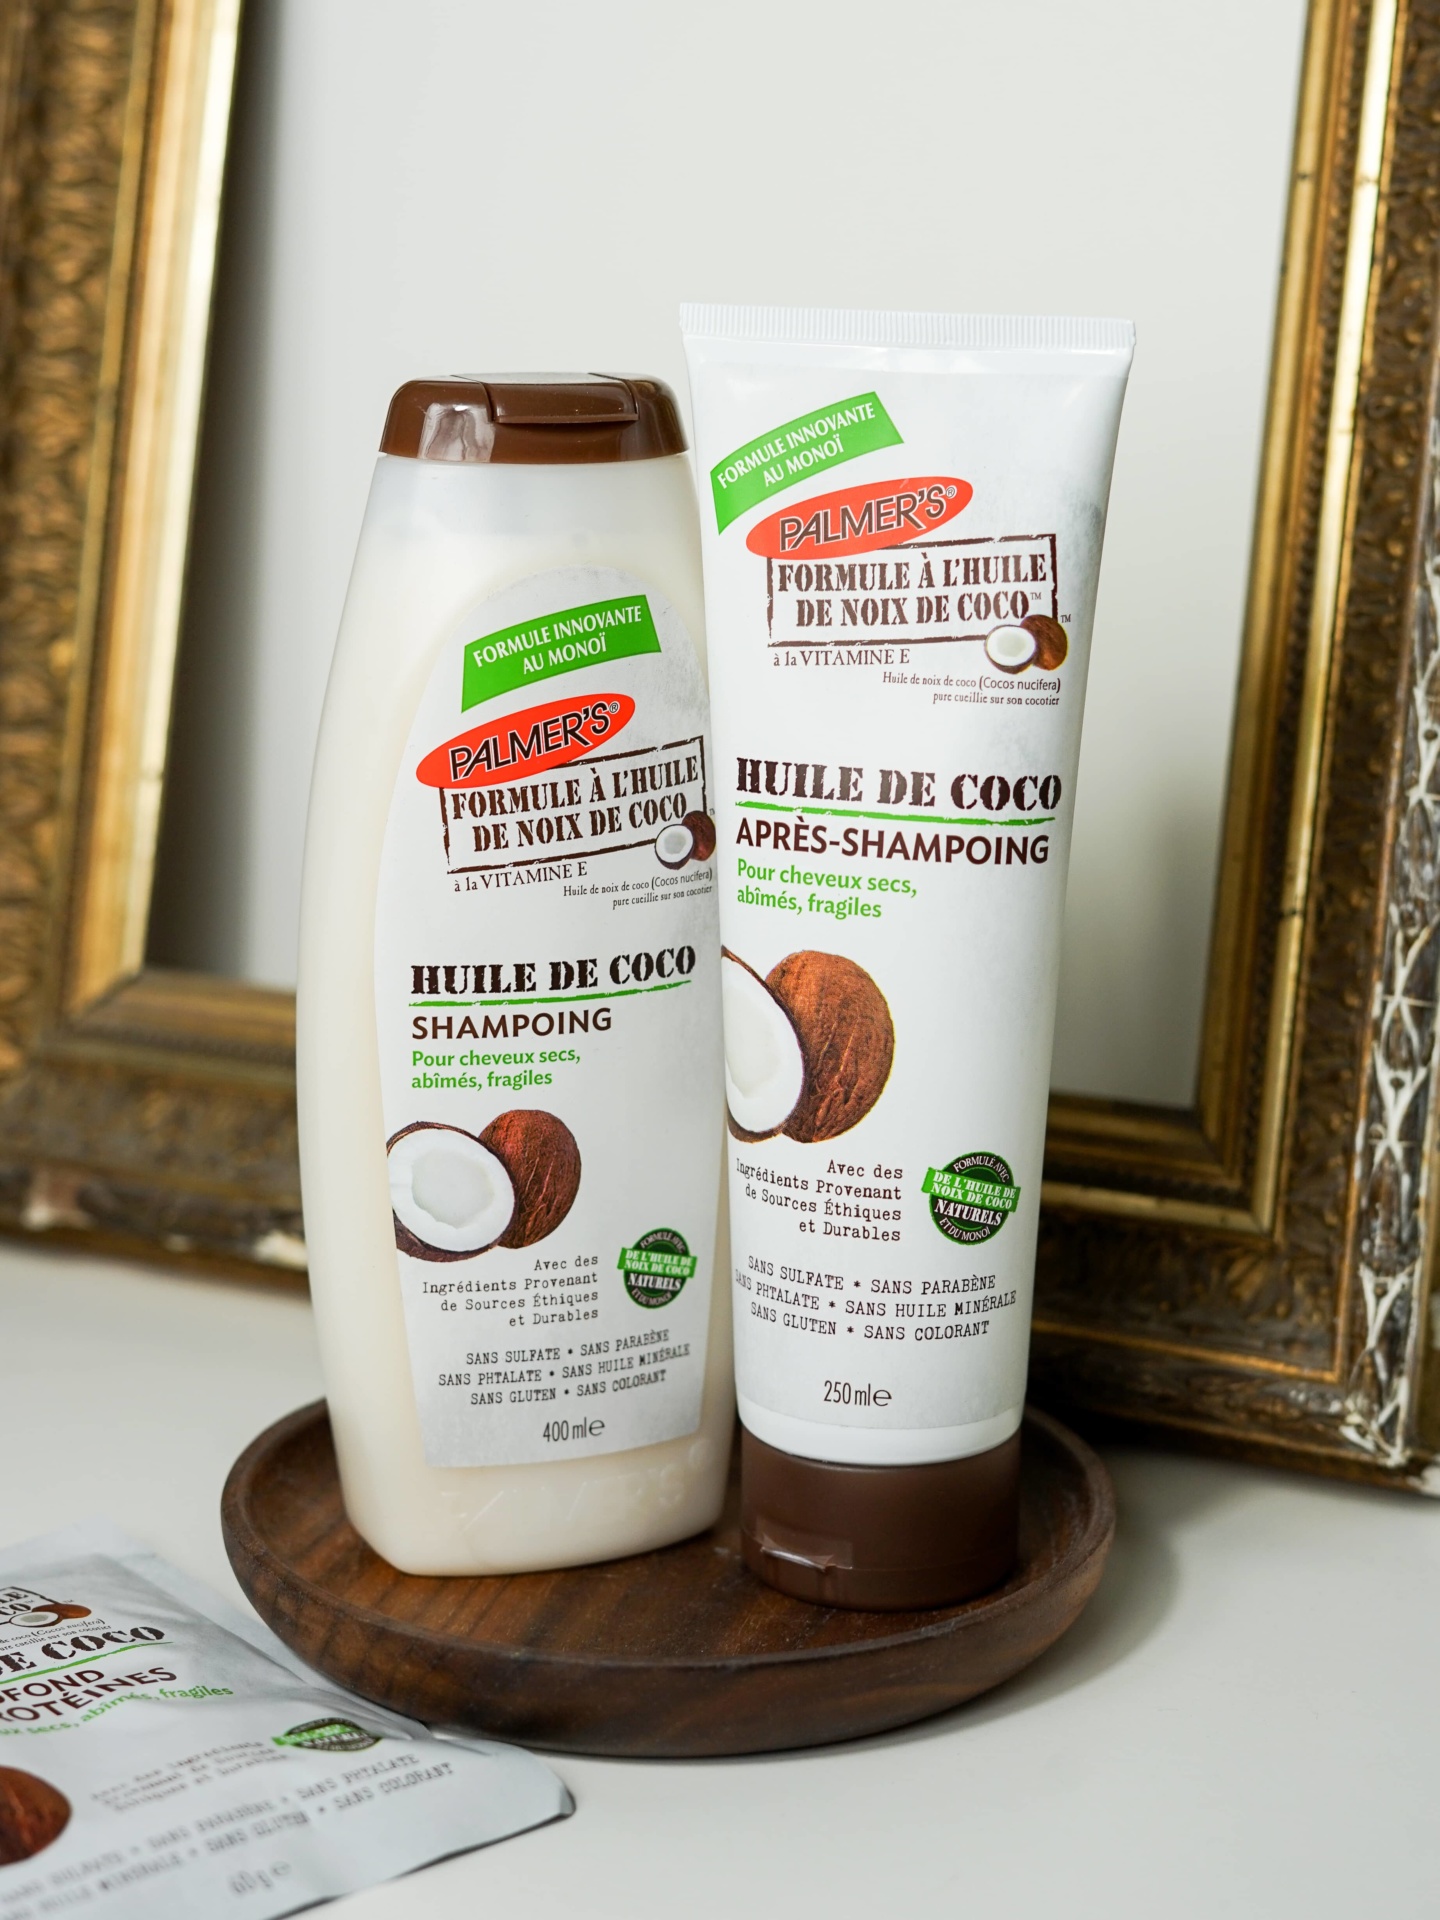 Palmers avis shampooing coco cheveux shampooing après shampoing